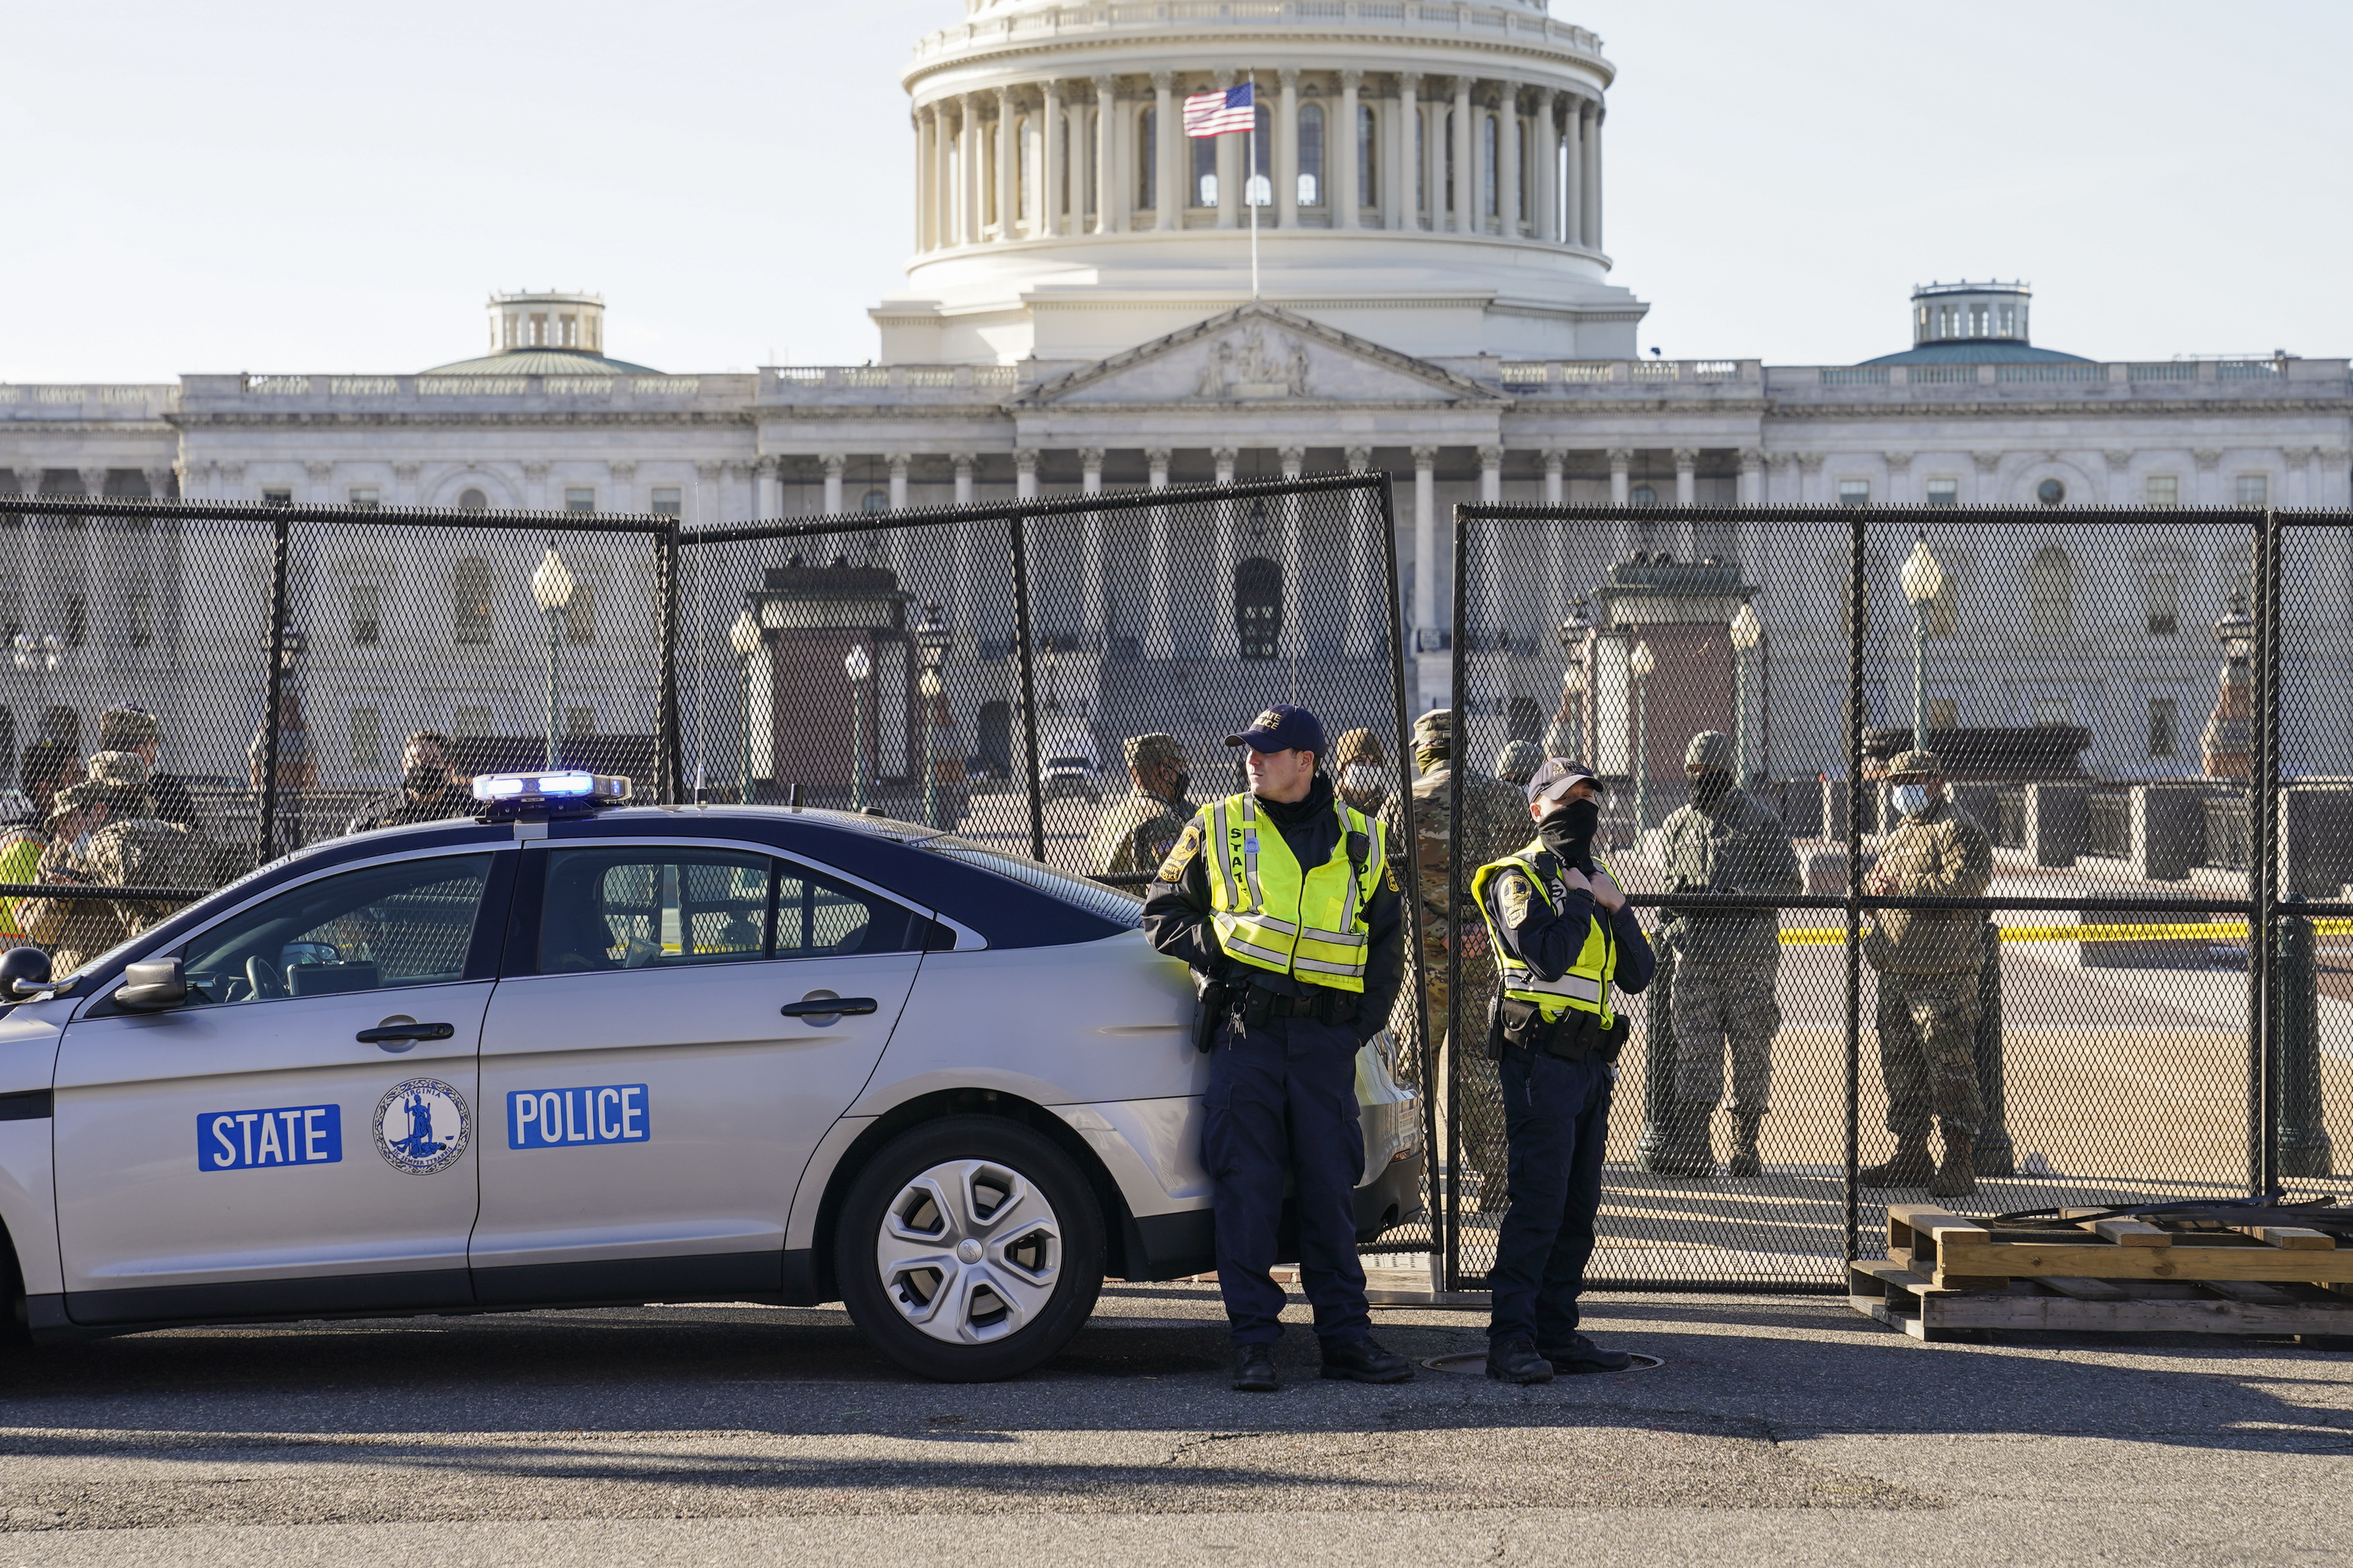 Fencing is placed around the exterior of the Capitol grounds the day after a violent throng of pro-Trump rioters spent hours running rampant through the Capitol. Lawmakers from both parties are criticizing the response by the U.S. Capitol Police. CREDIT: John Minchillo/AP